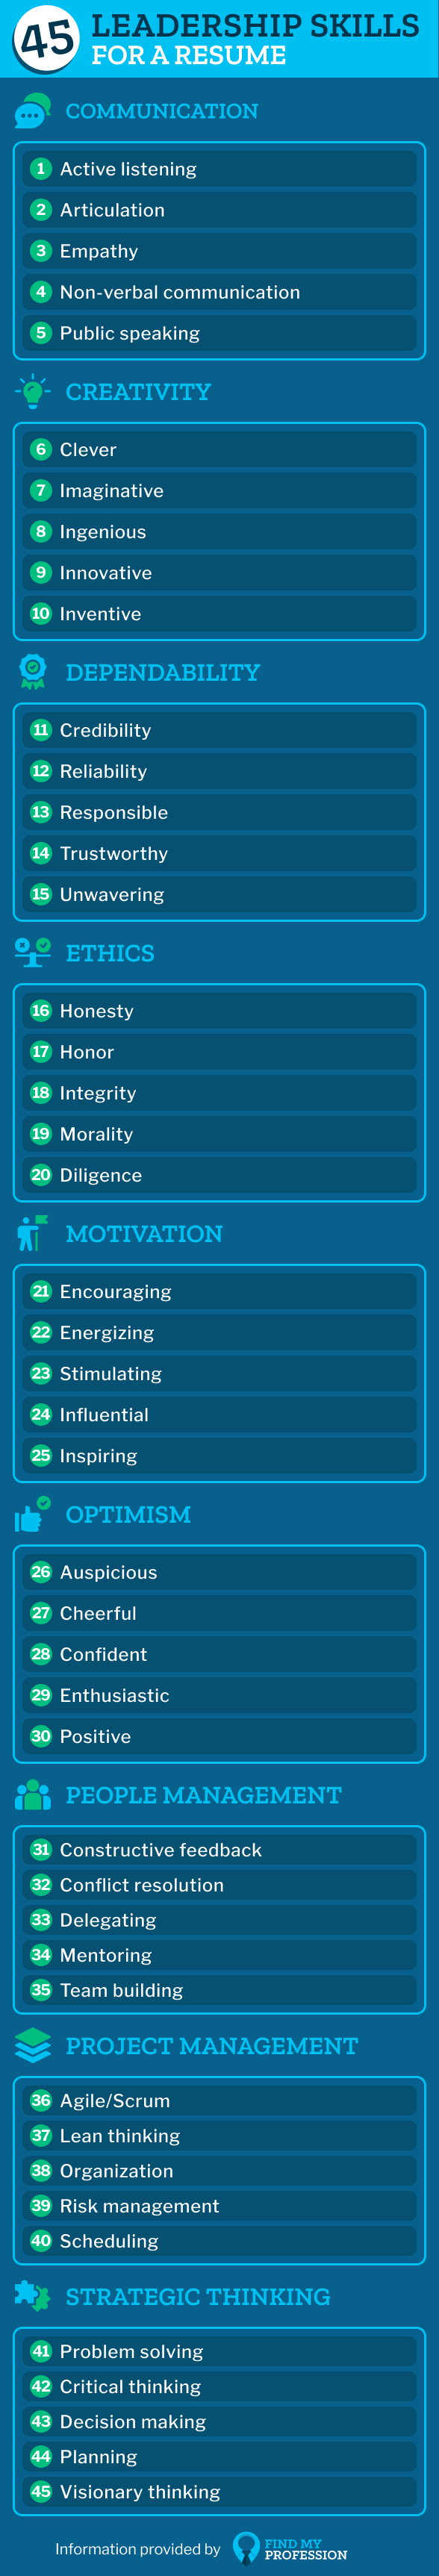 Synonyms for Being Enthusiastic on a Resume